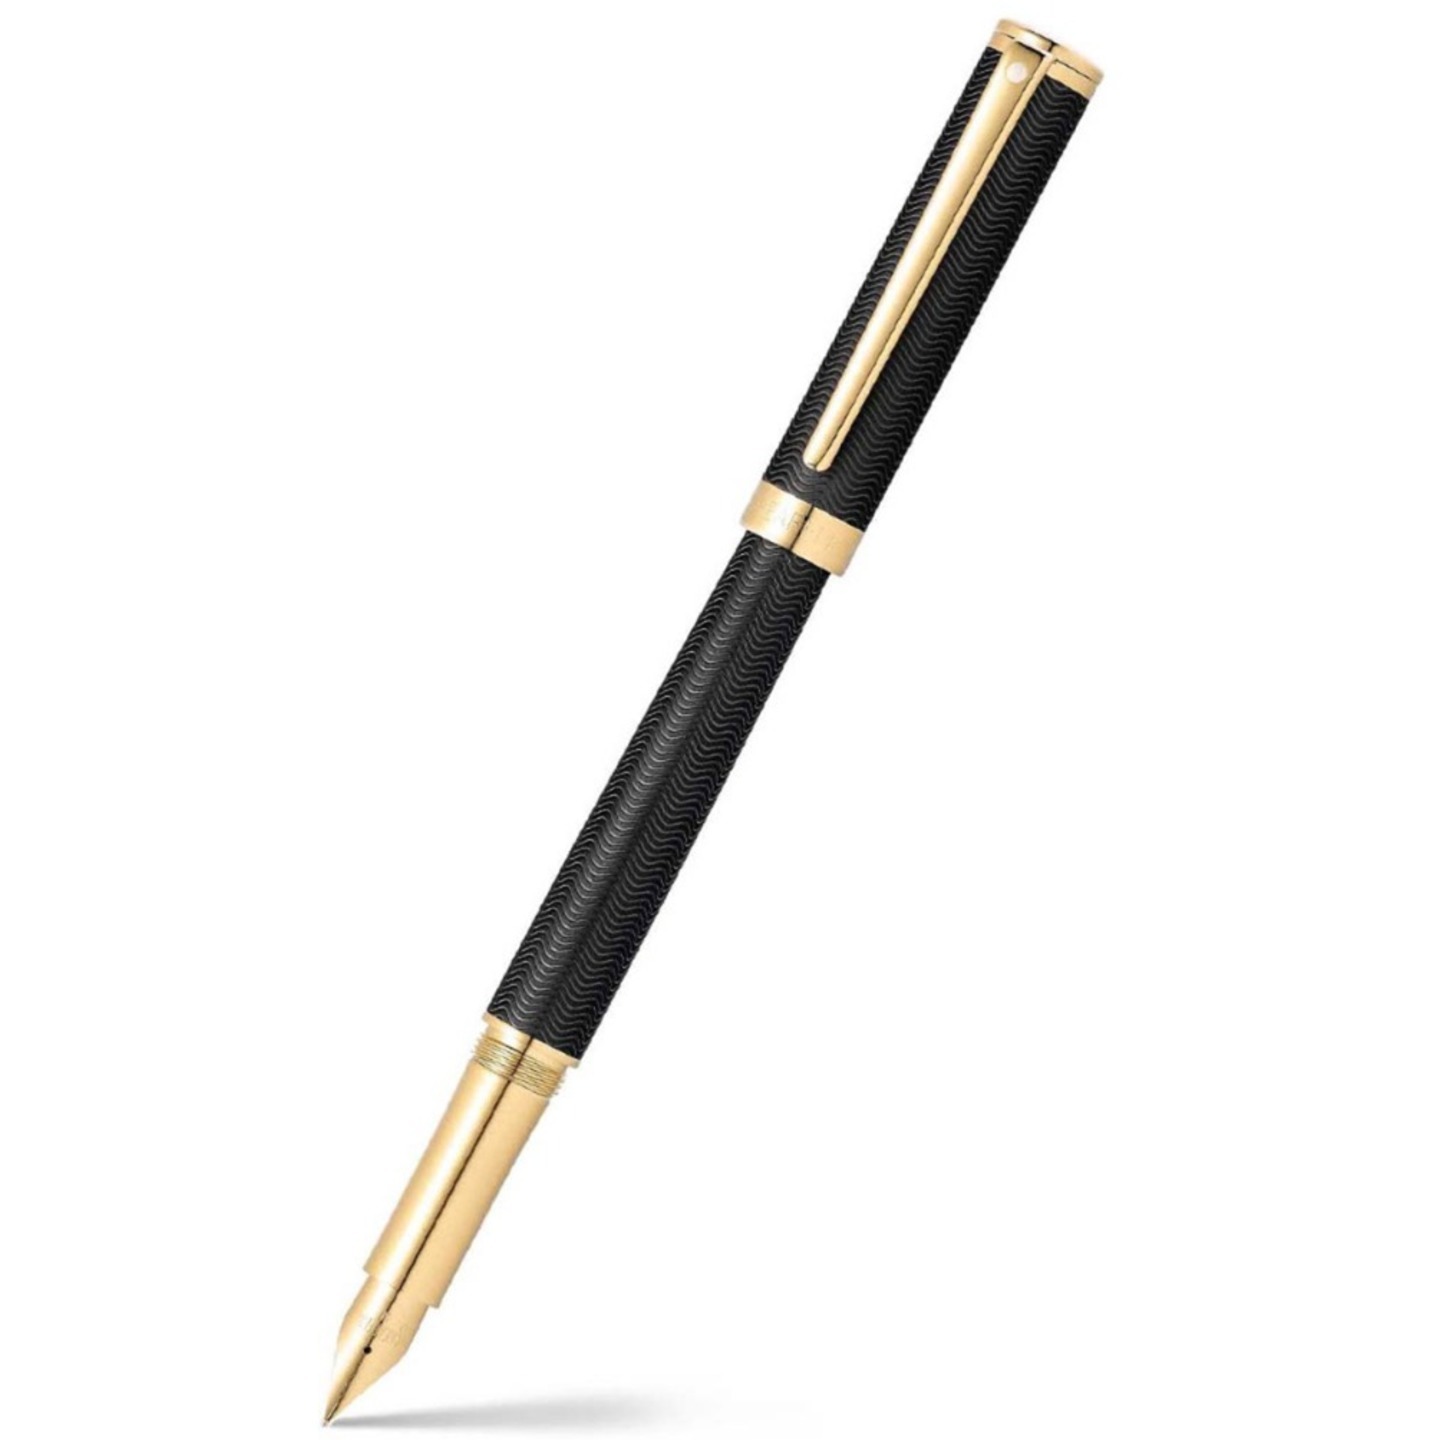 Sheaffer 9242 Intensity Fountain Pen – Engraved Matte Black With Gold Tone Trim